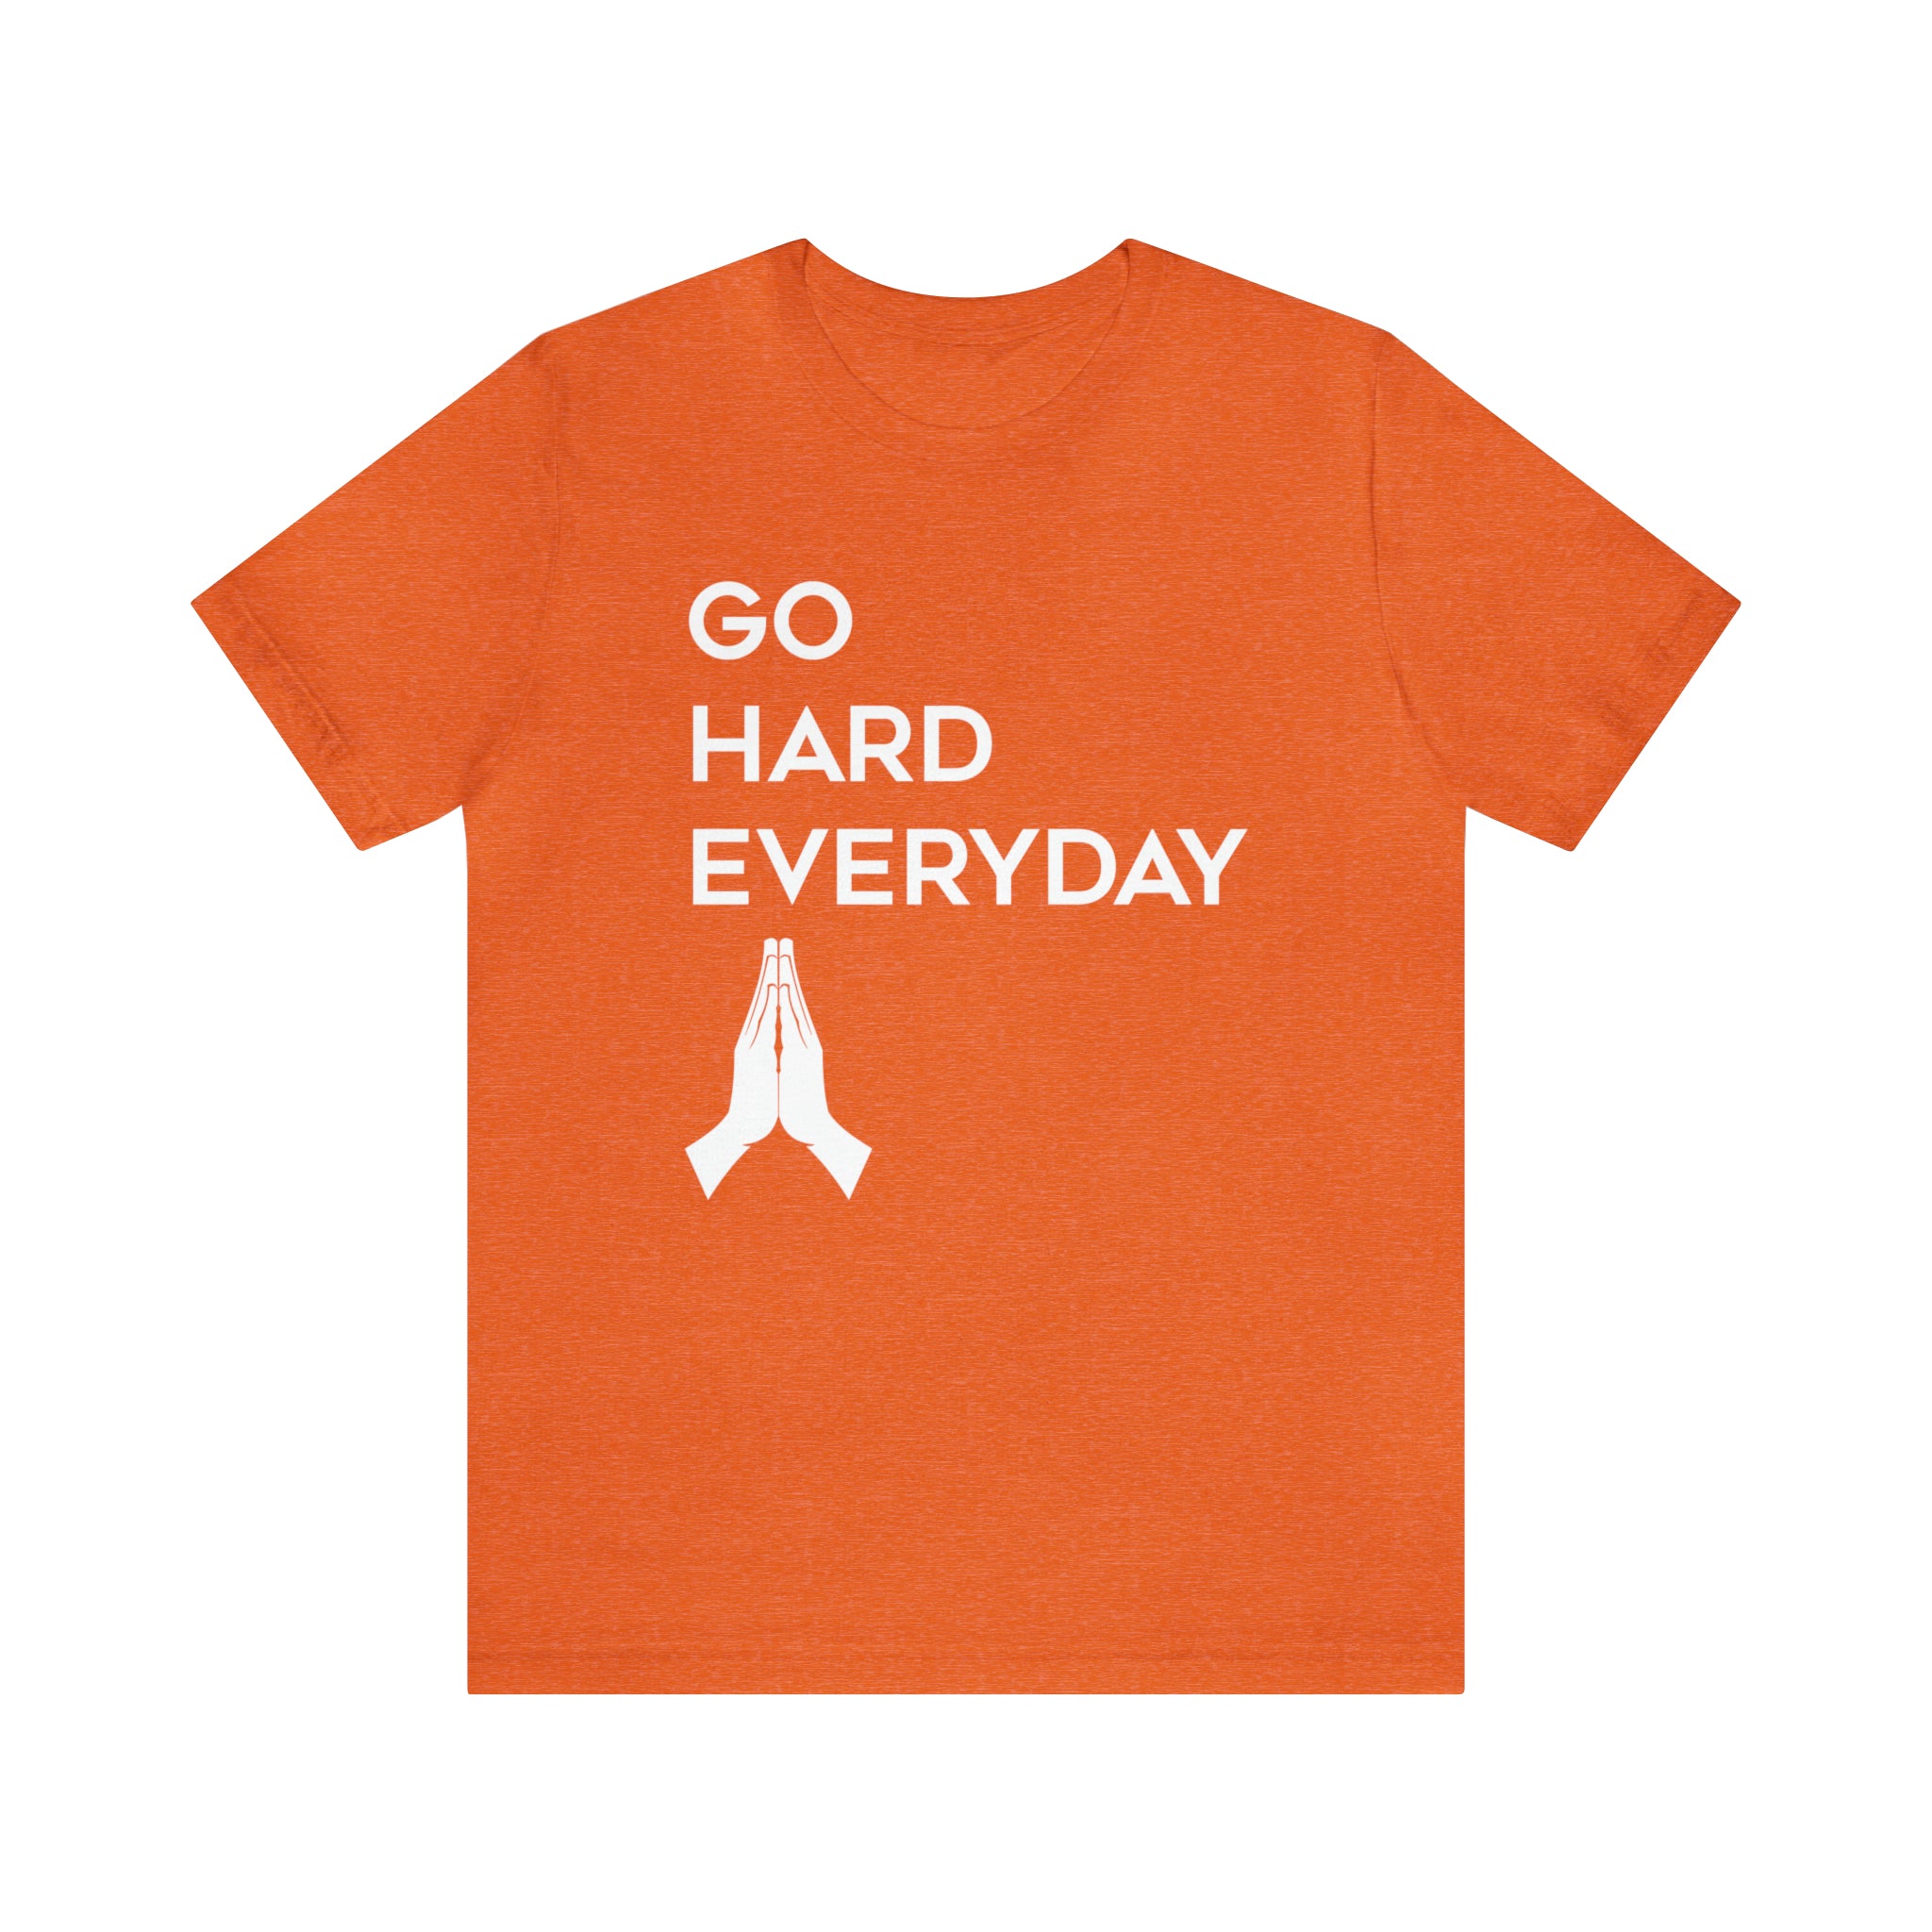 Go Hard Everyday Tee, Used By God, Used By God Clothing, Christian Apparel, Christian T-Shirts, Christian Shirts, christian t shirts for women, Men's Christian T-Shirt, Christian Clothing, God Shirts, christian clothing t shirts, Christian Sweatshirts, womens christian t shirts, t-shirts about jesus, God Clothing, Jesus Hoodie, Jesus Clothes, God Is Dope, Art Of Homage, Red Letter Clothing, Elevated Faith, Beacon Threads, God The Father Apparel